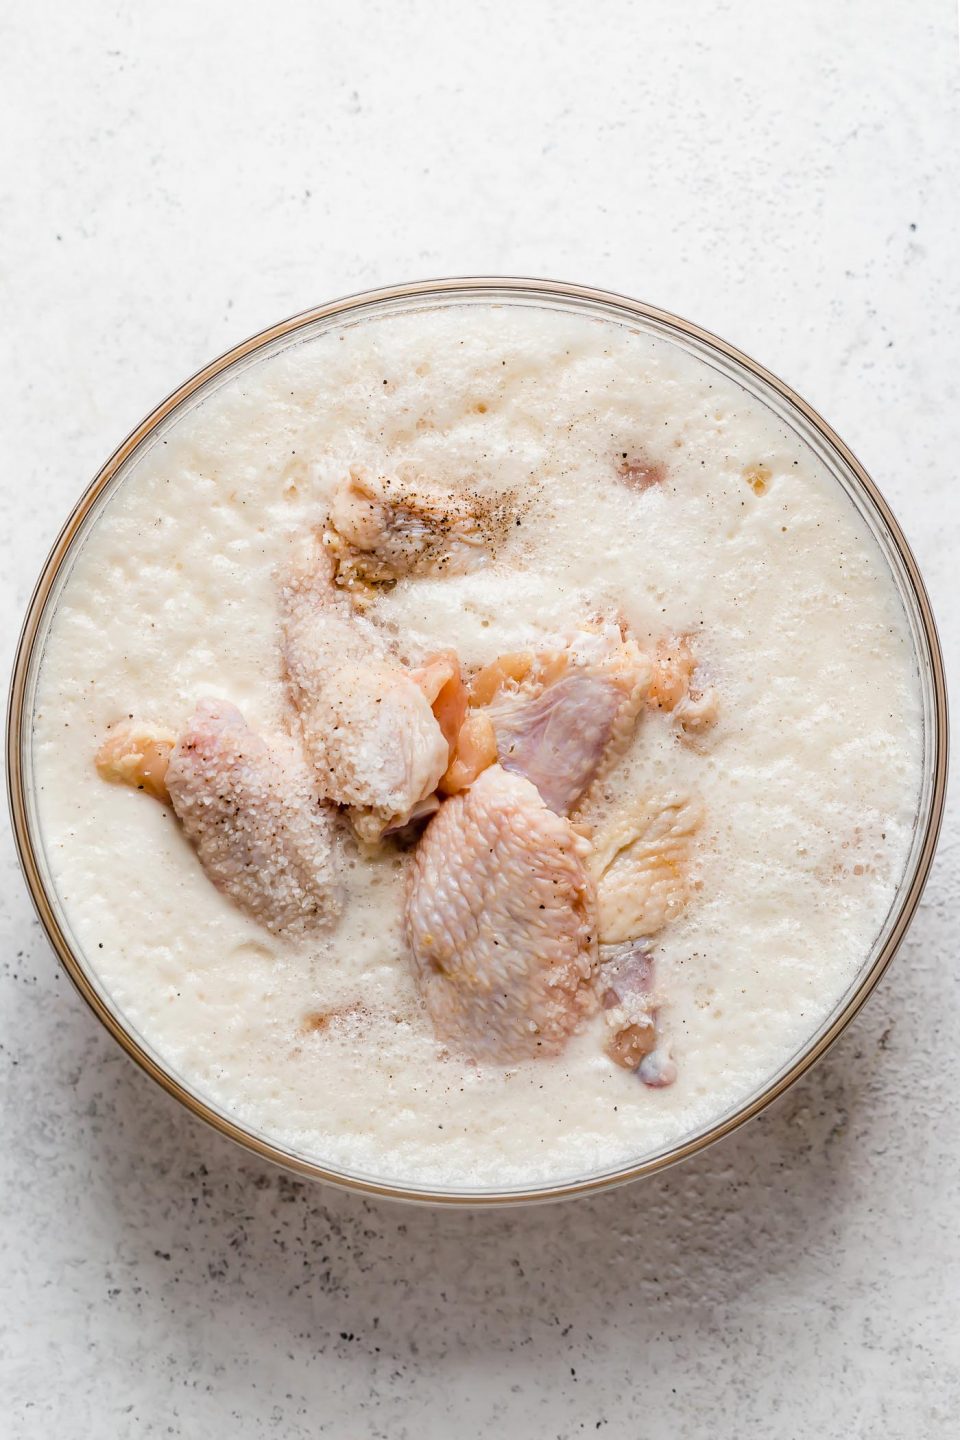 Chicken wings brine in beer inside of a clear glass mixing bowl that sits atop a creamy white textured surface.